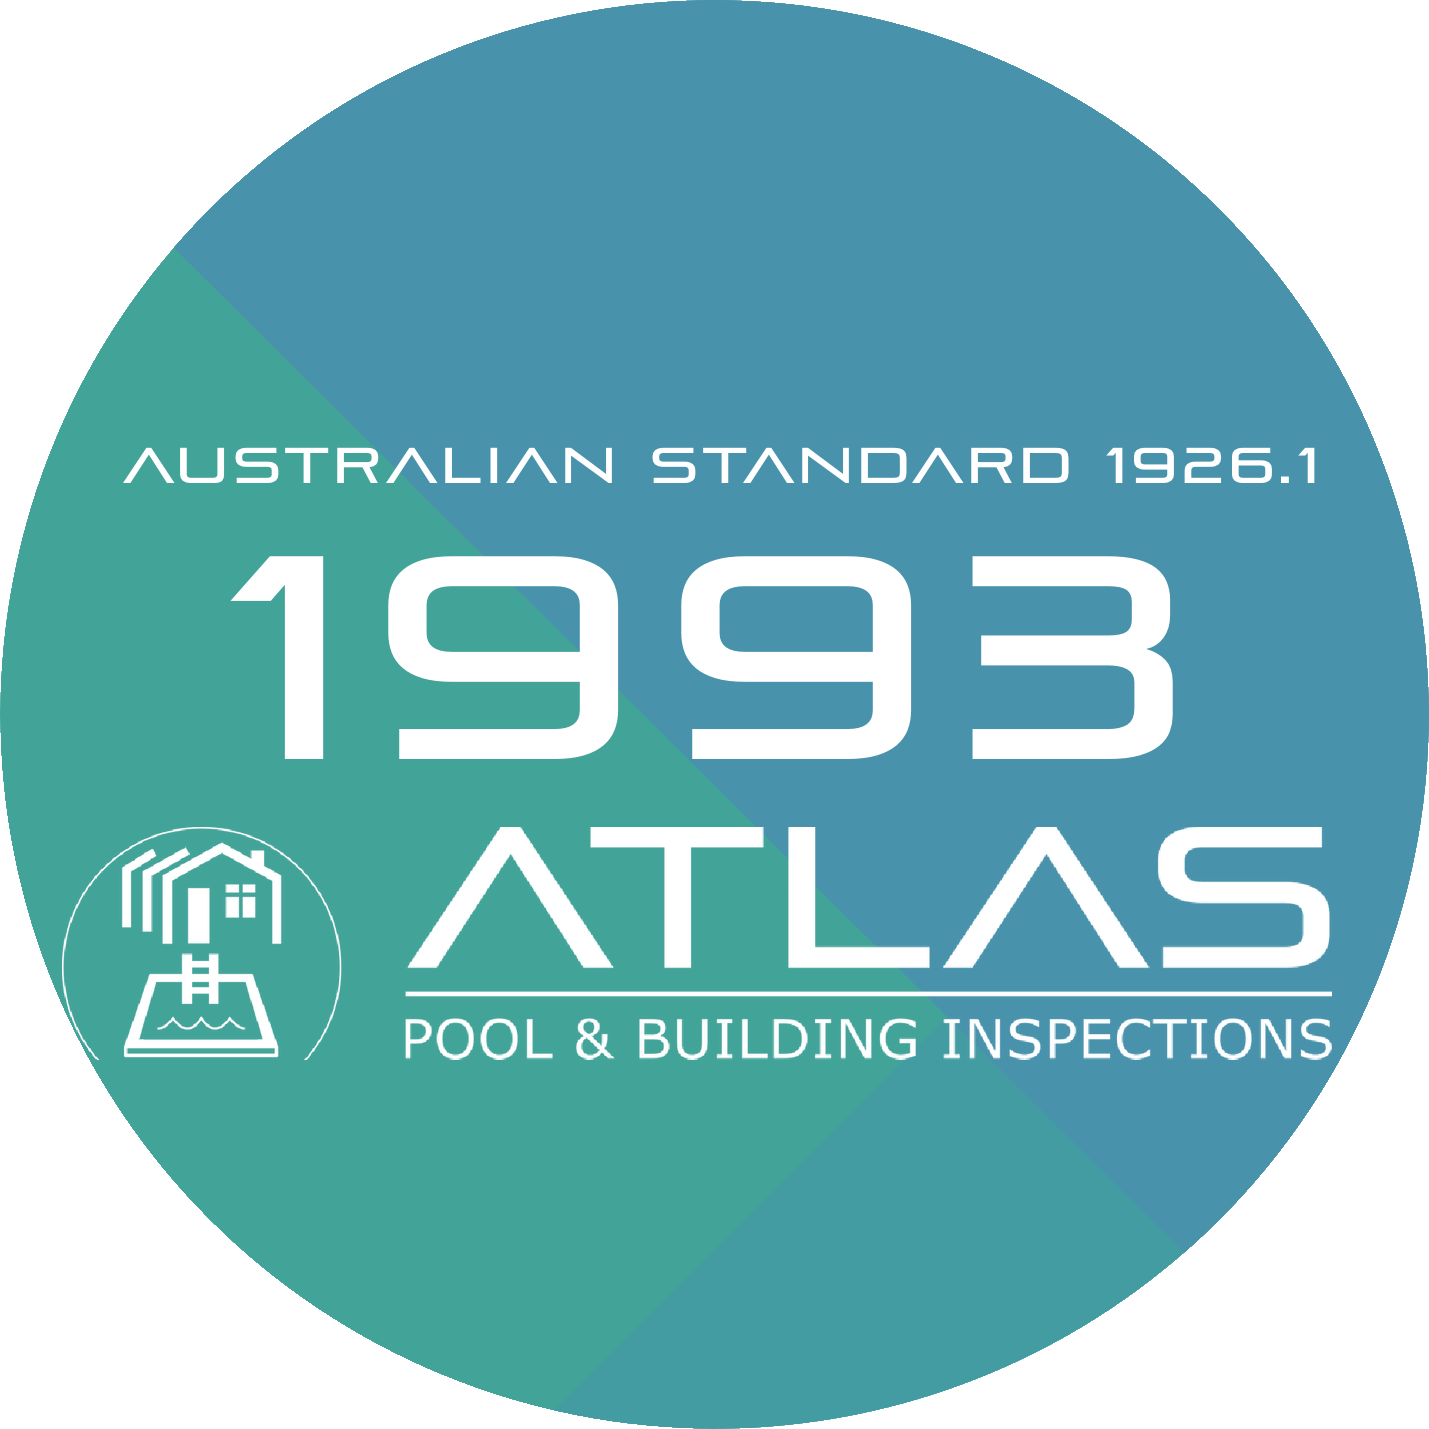 Pool Safety Report for AS 1926.1 - 1993